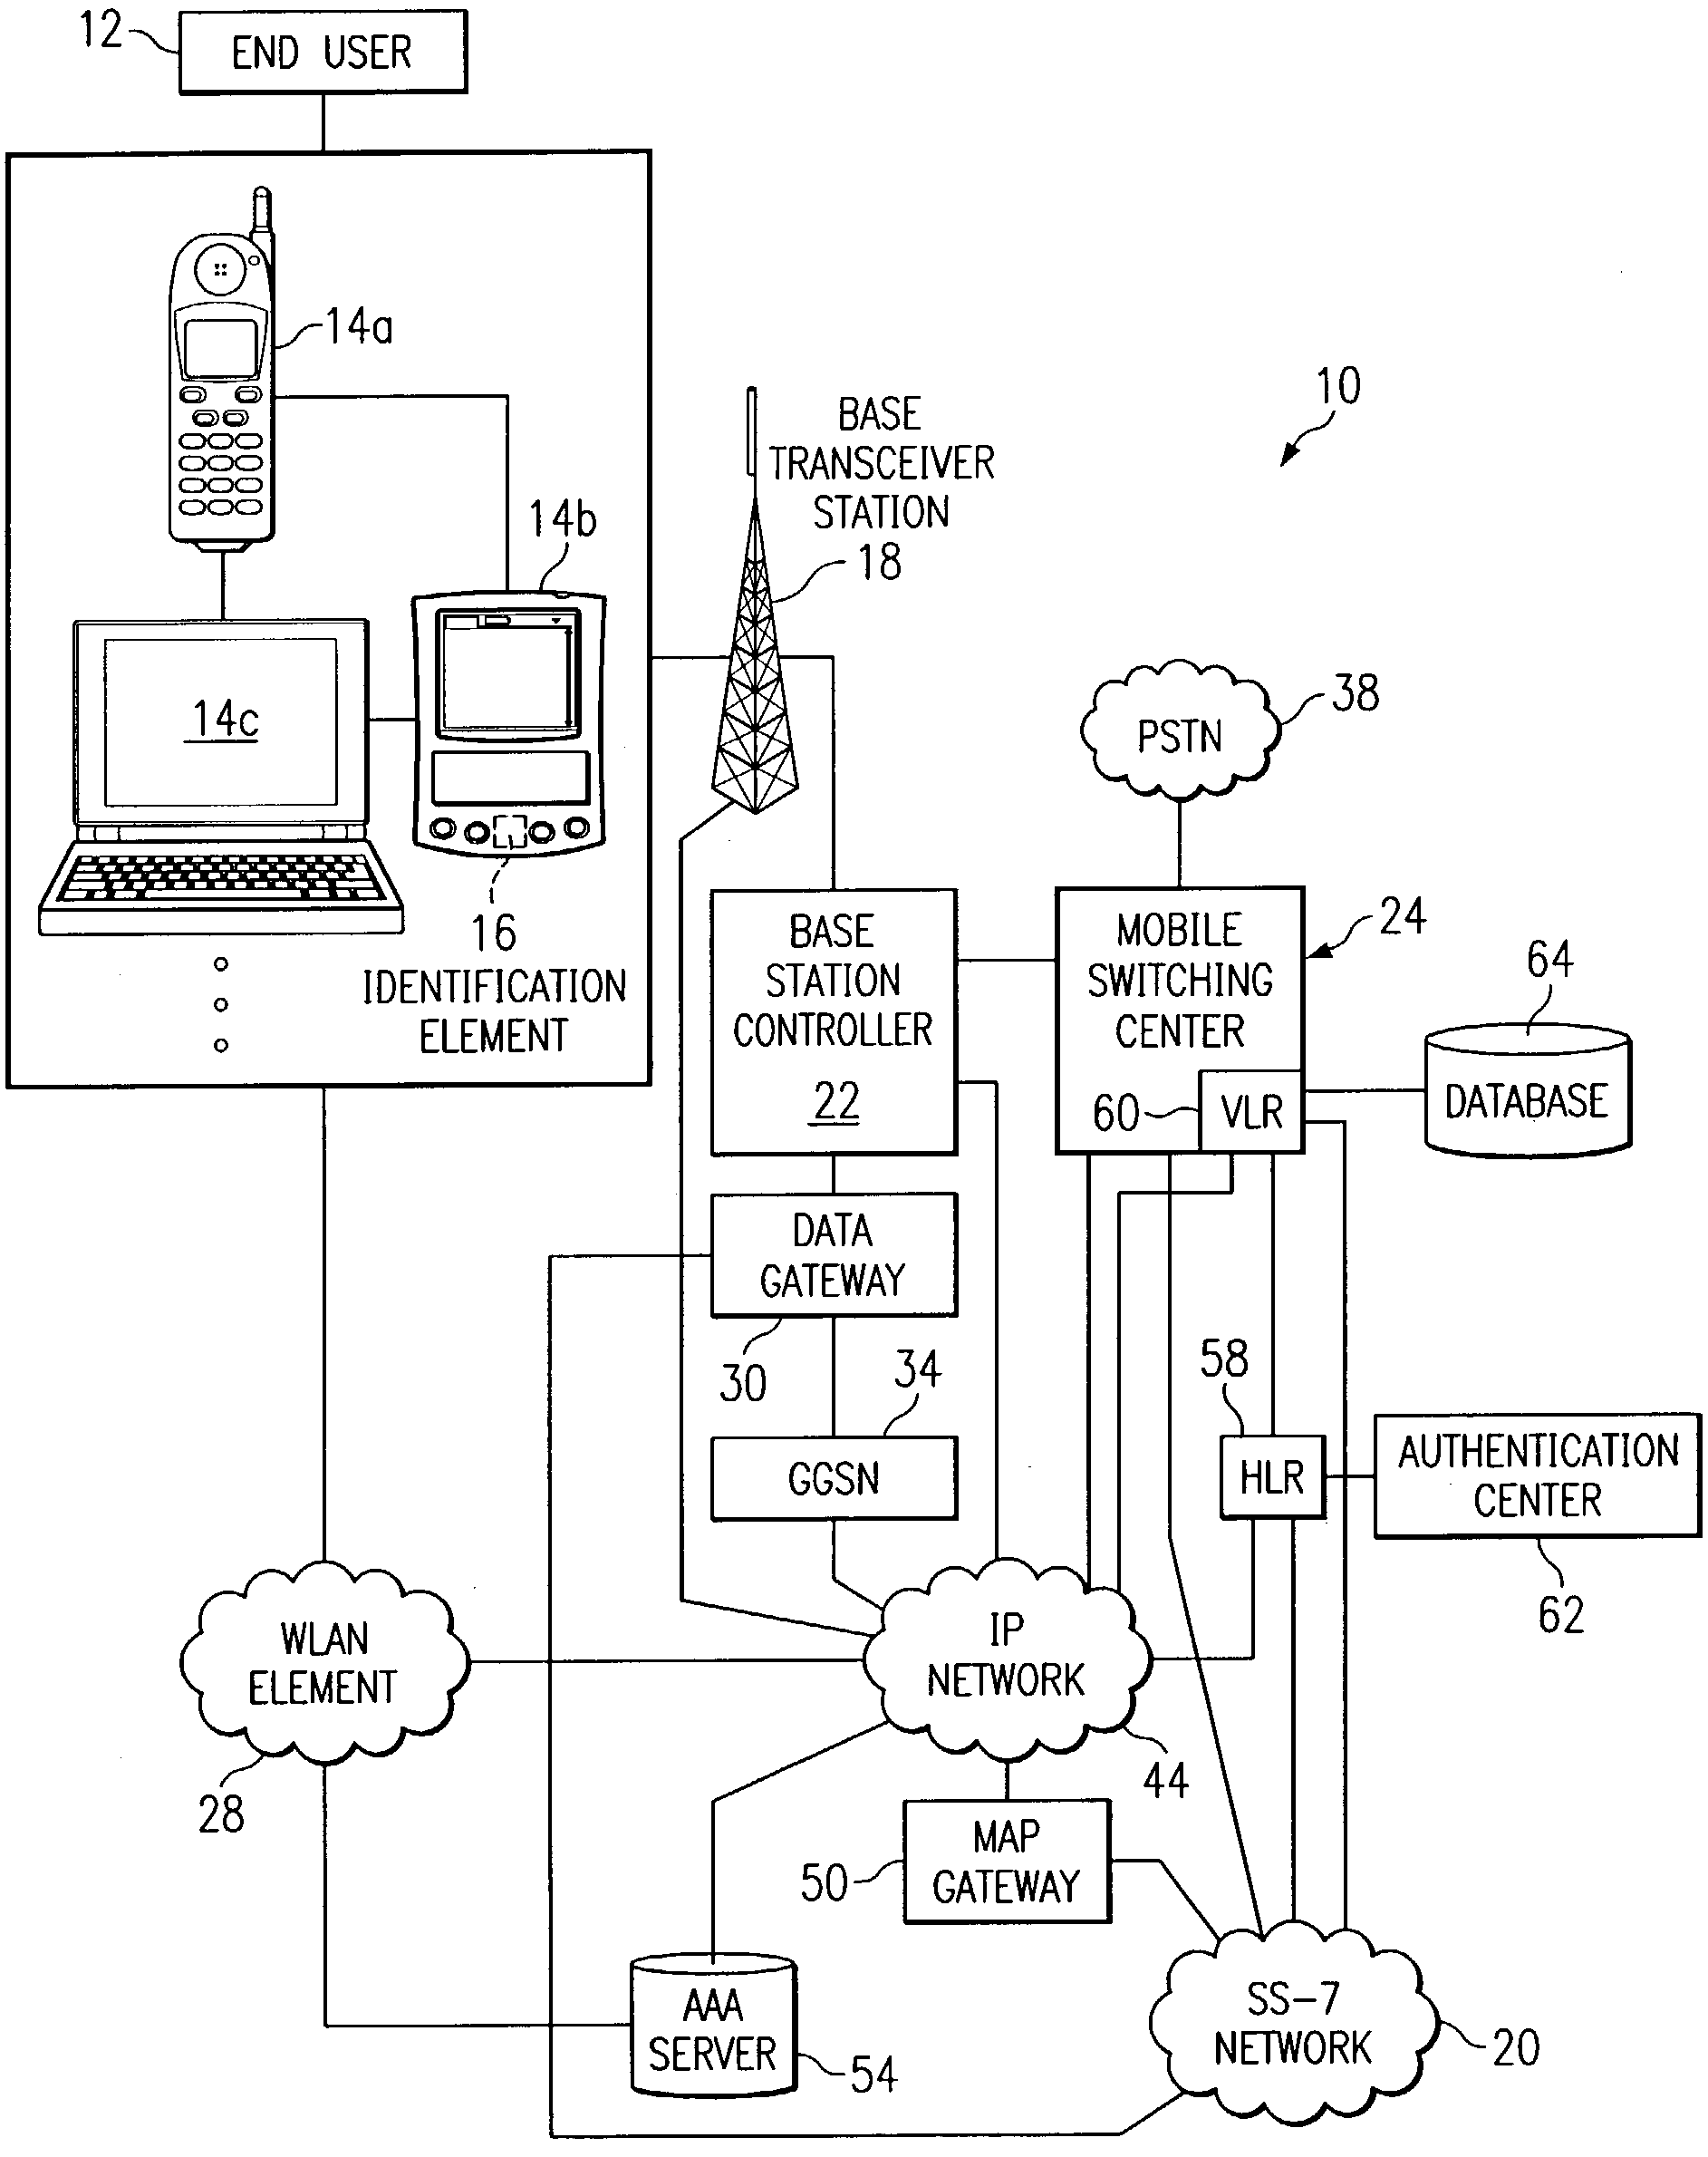 System and method for authenticating an element in a network environment